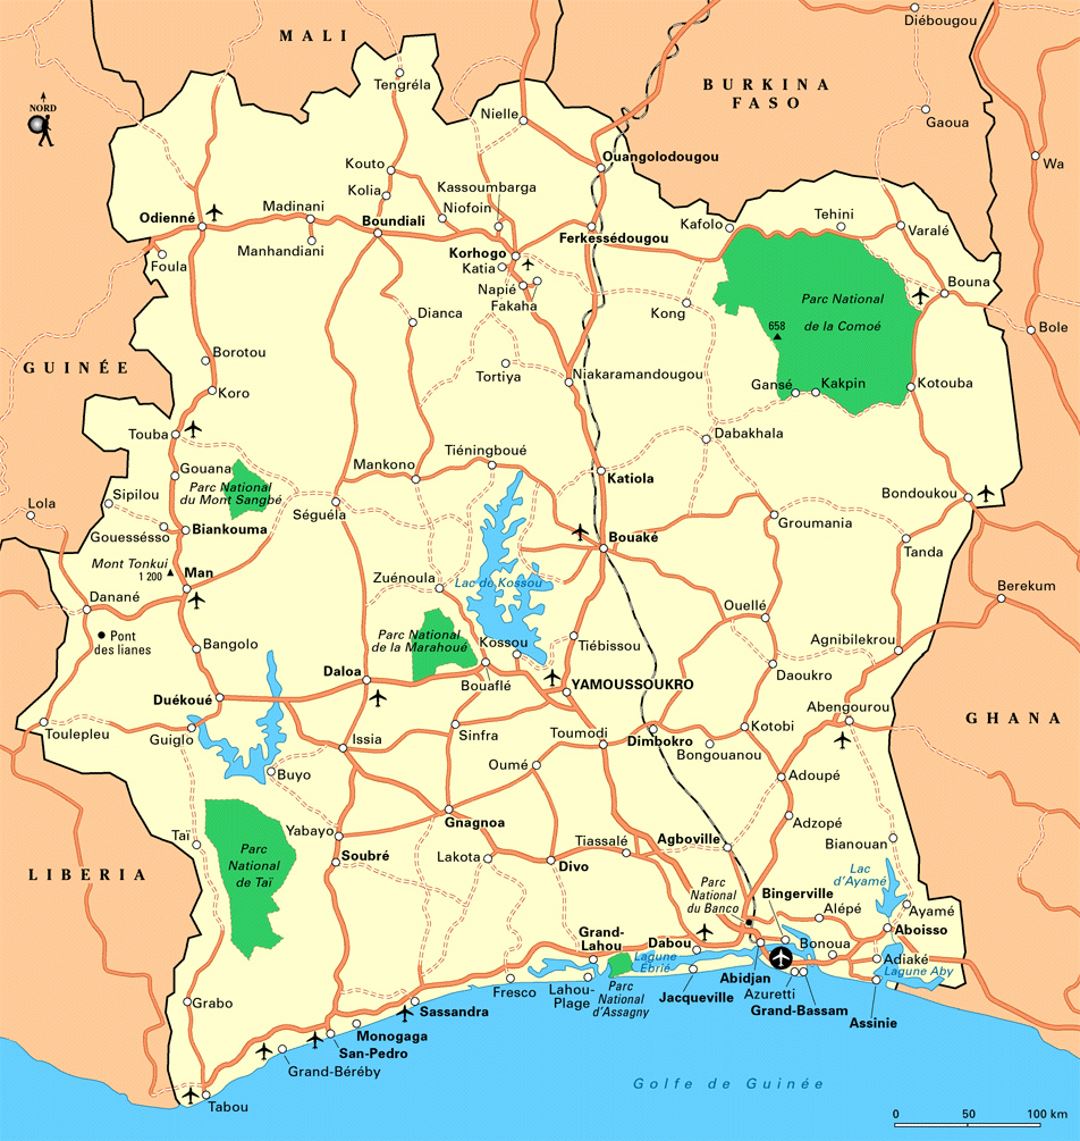 Detailed map of Cote d'Ivoire with roads, railroads, cities, airports and national parks